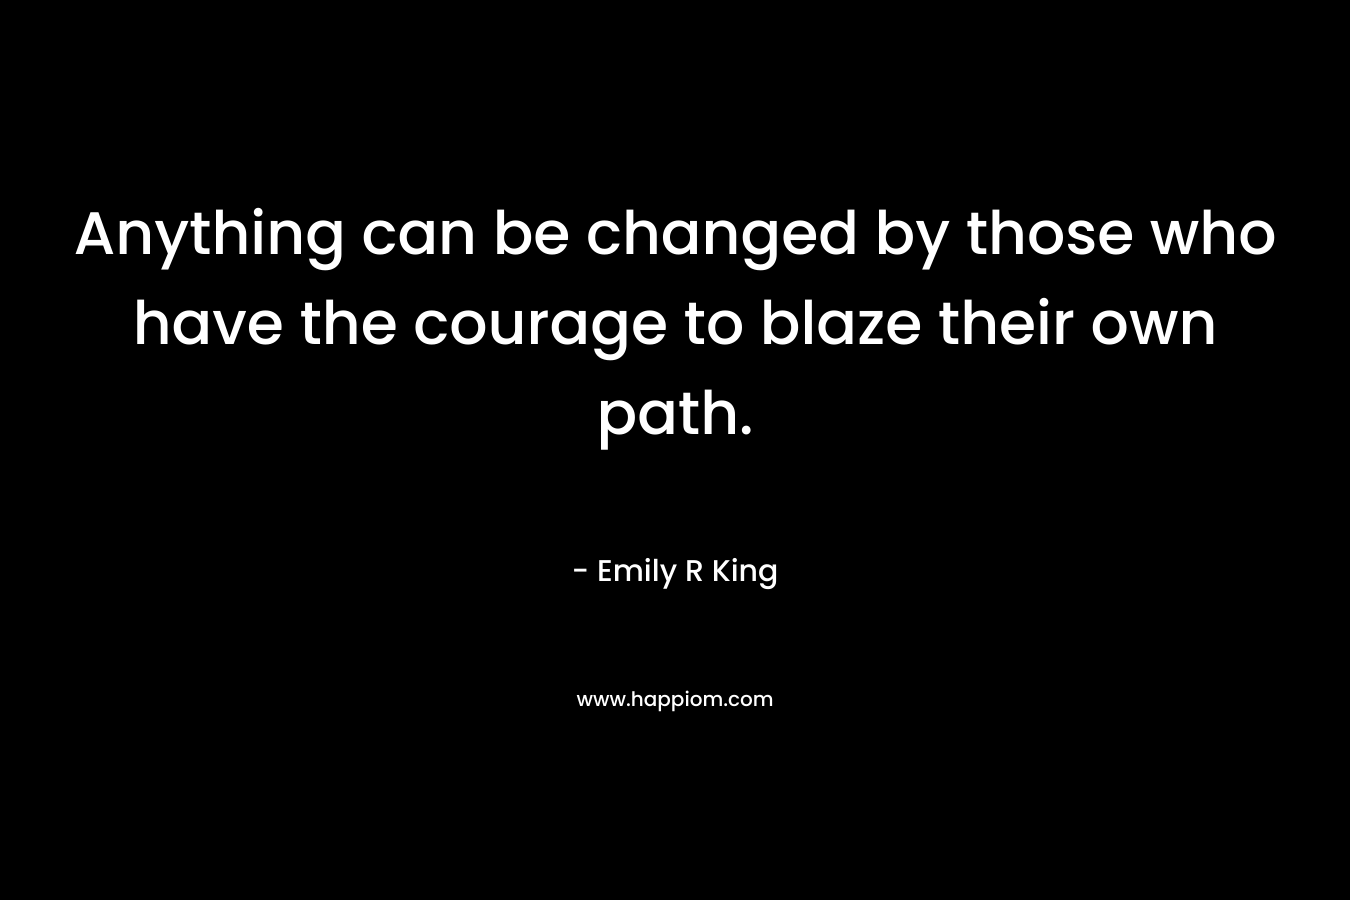 Anything can be changed by those who have the courage to blaze their own path.